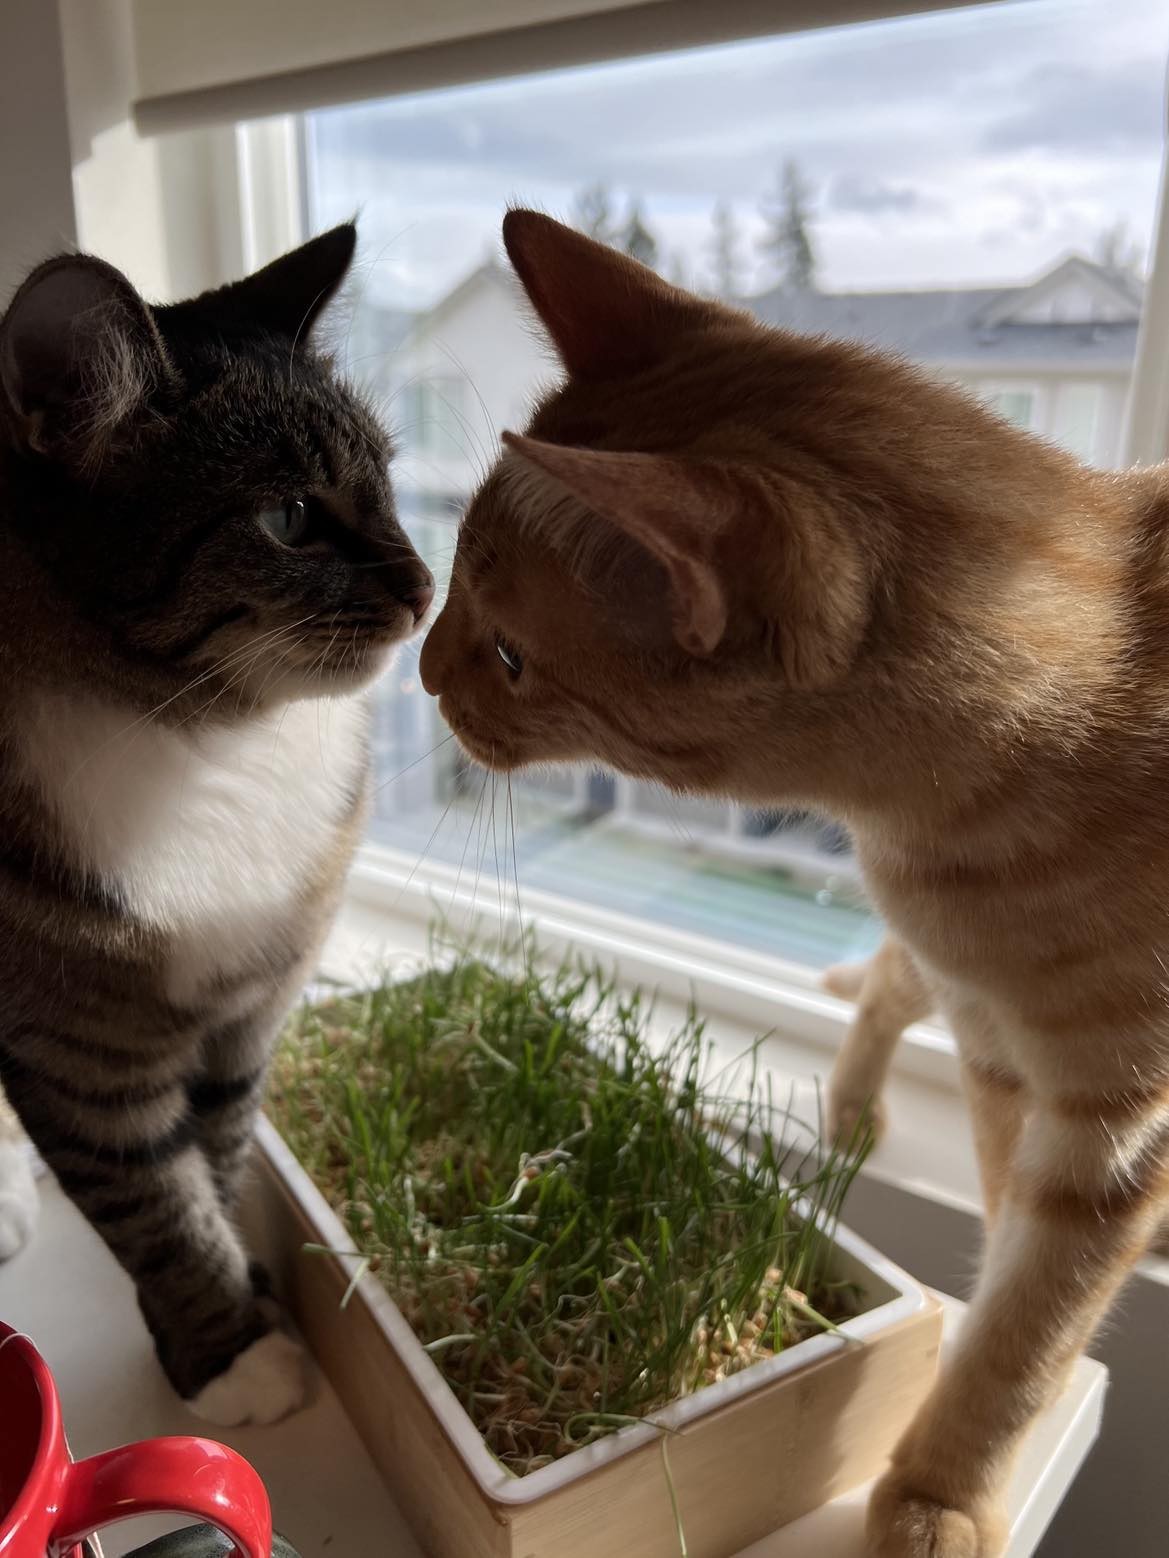 A close up picture of two cats sniffing each other's noses. The one on the left is a brown and white tabby, and the one on the right is an orange tabby.